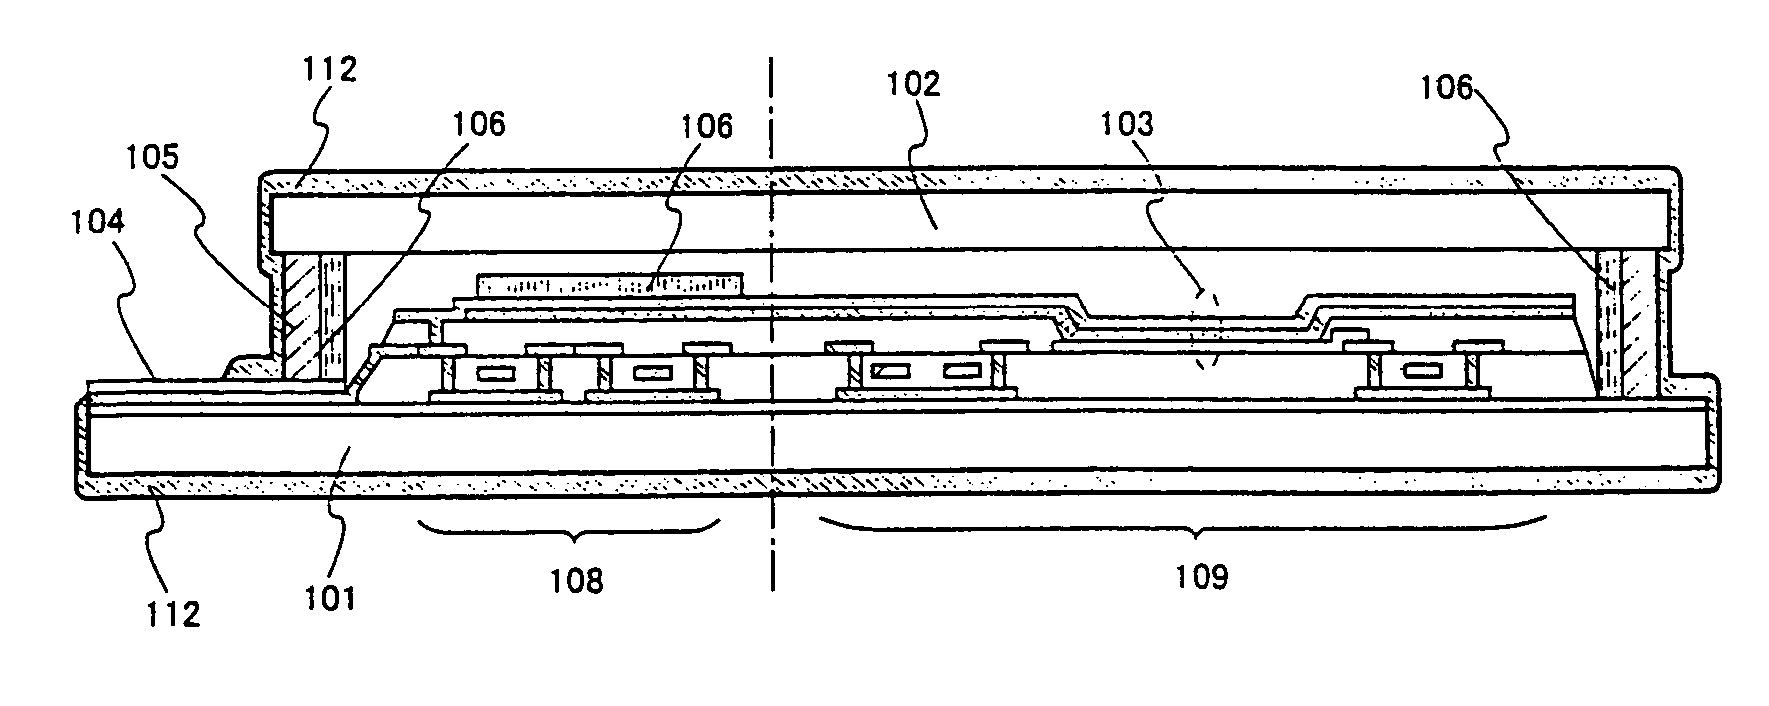 Light-emitting device with coating film on portions of substrates and sealing member